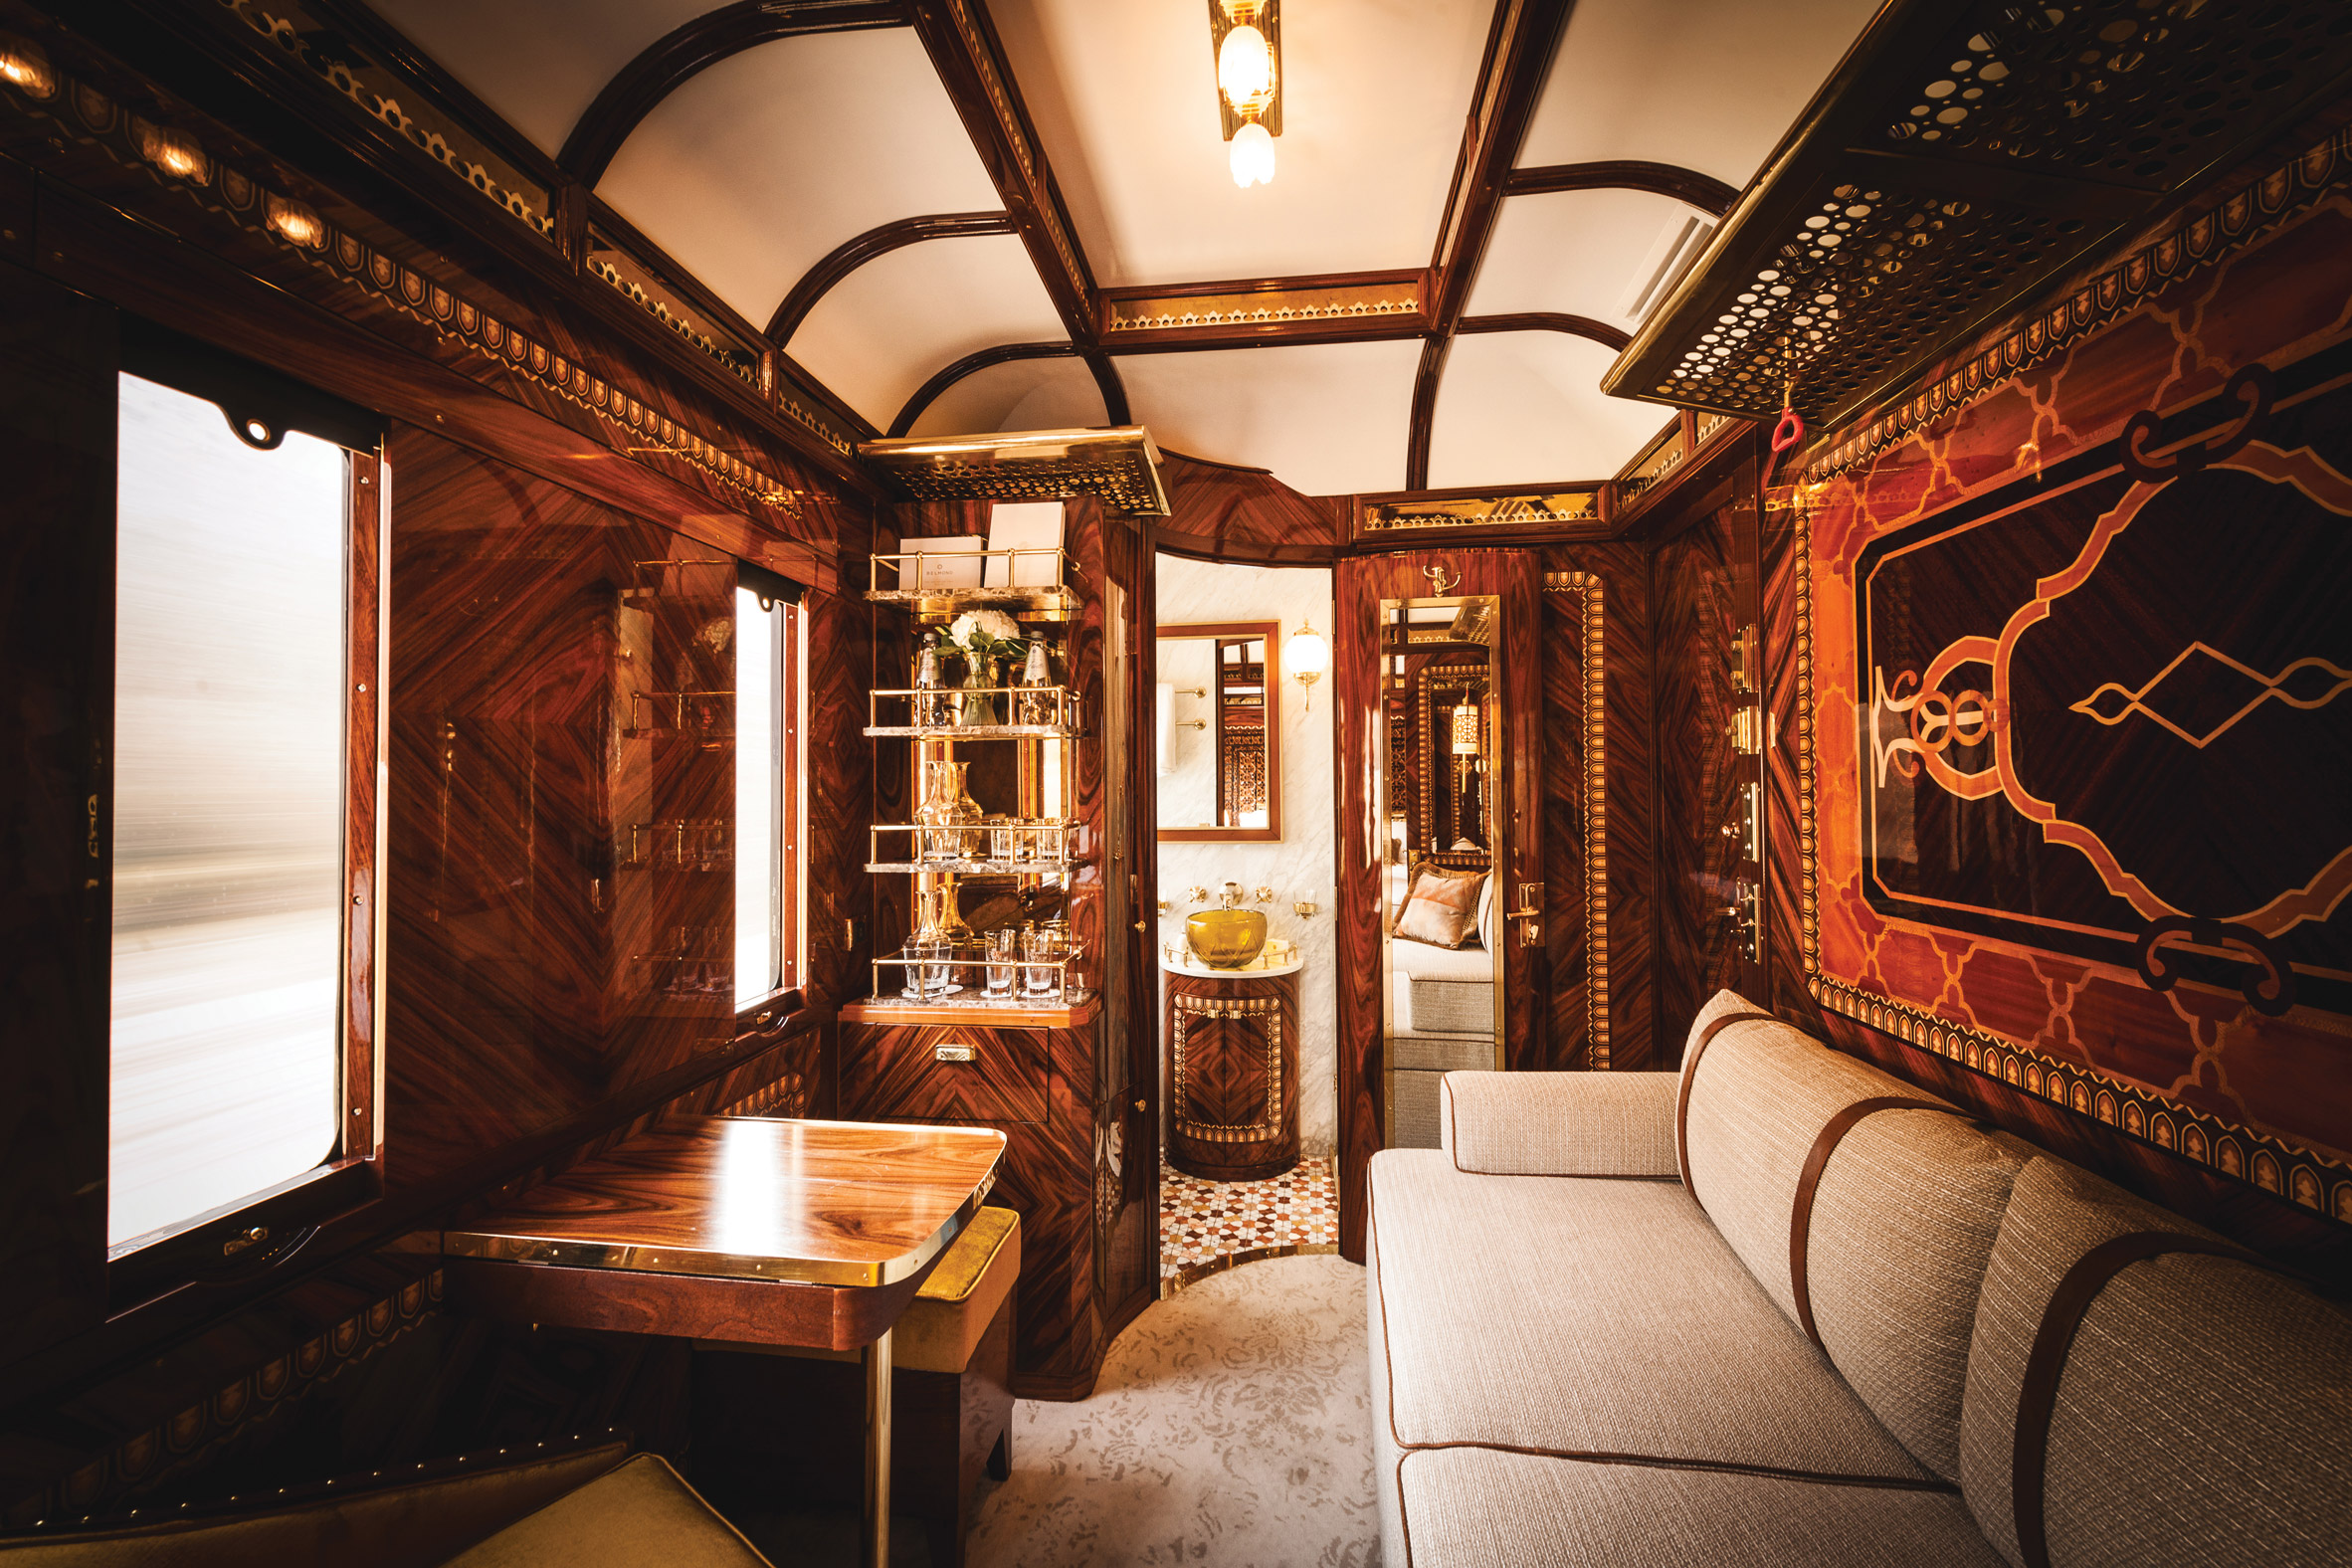 The Belmond Simplon-Orient Express won the Suites category at the AHEAD Global awards, which were held at the Ham Yard Hotel in London